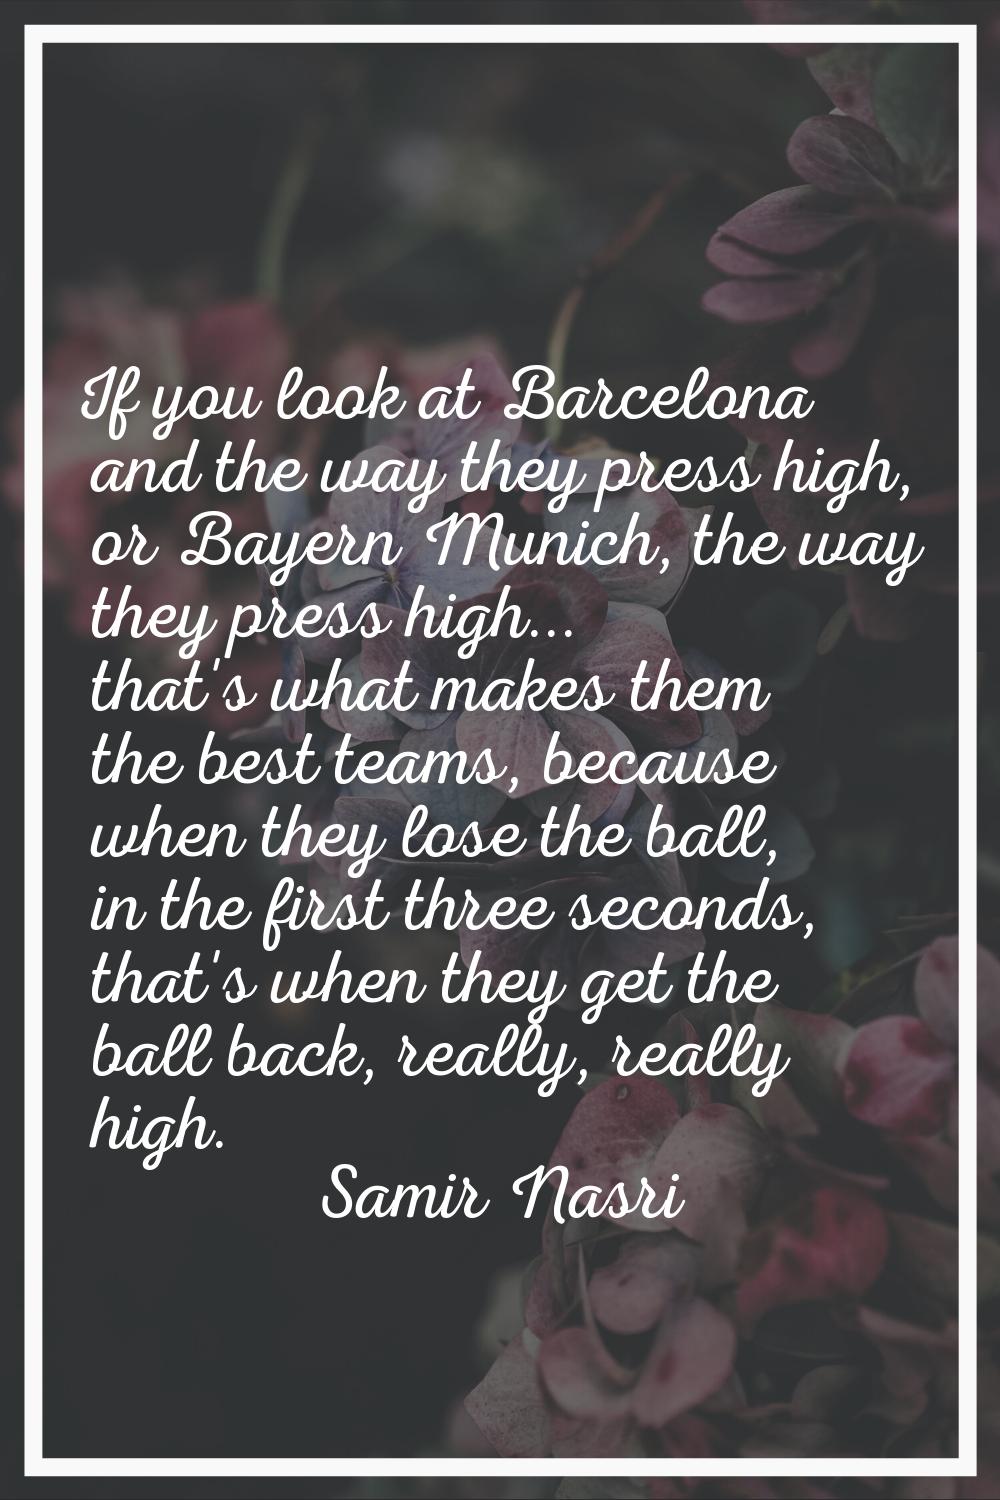 If you look at Barcelona and the way they press high, or Bayern Munich, the way they press high... 